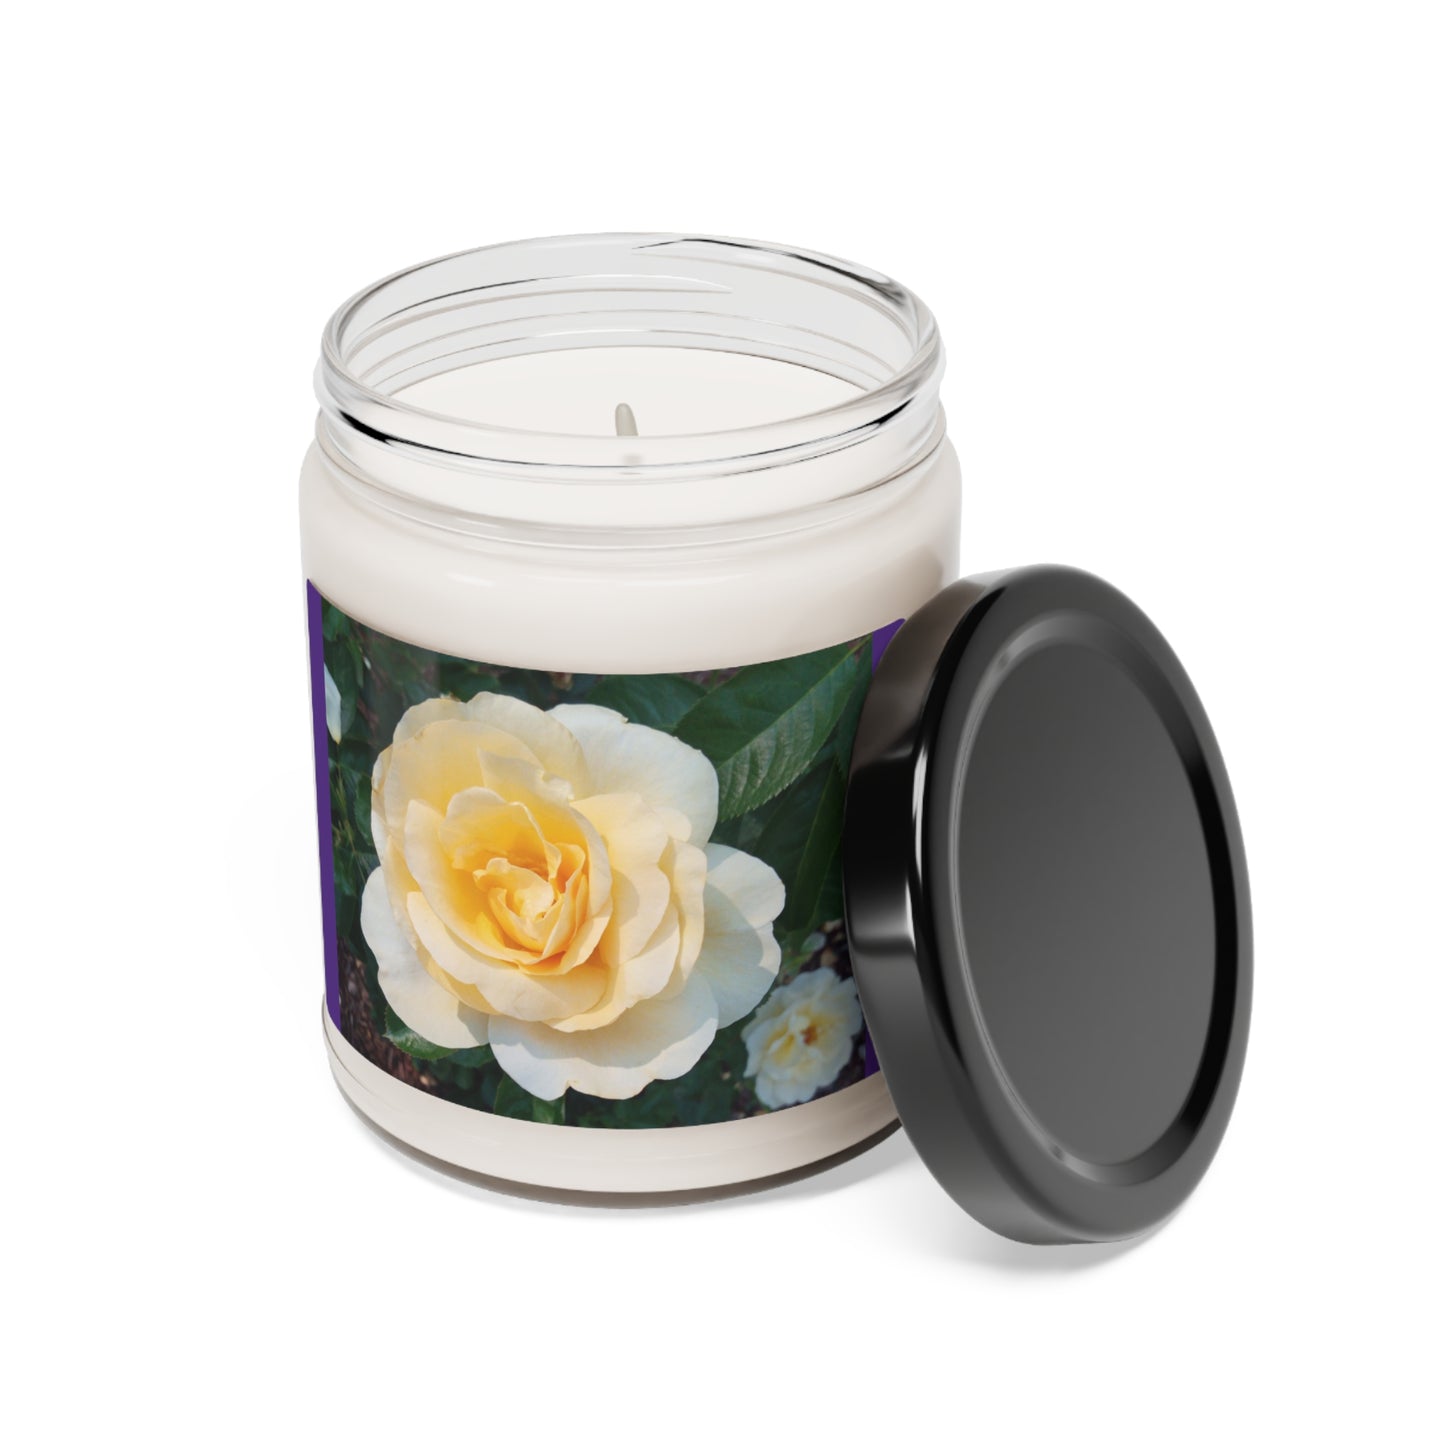 Cream Rose Scented Soy Candle, 9oz